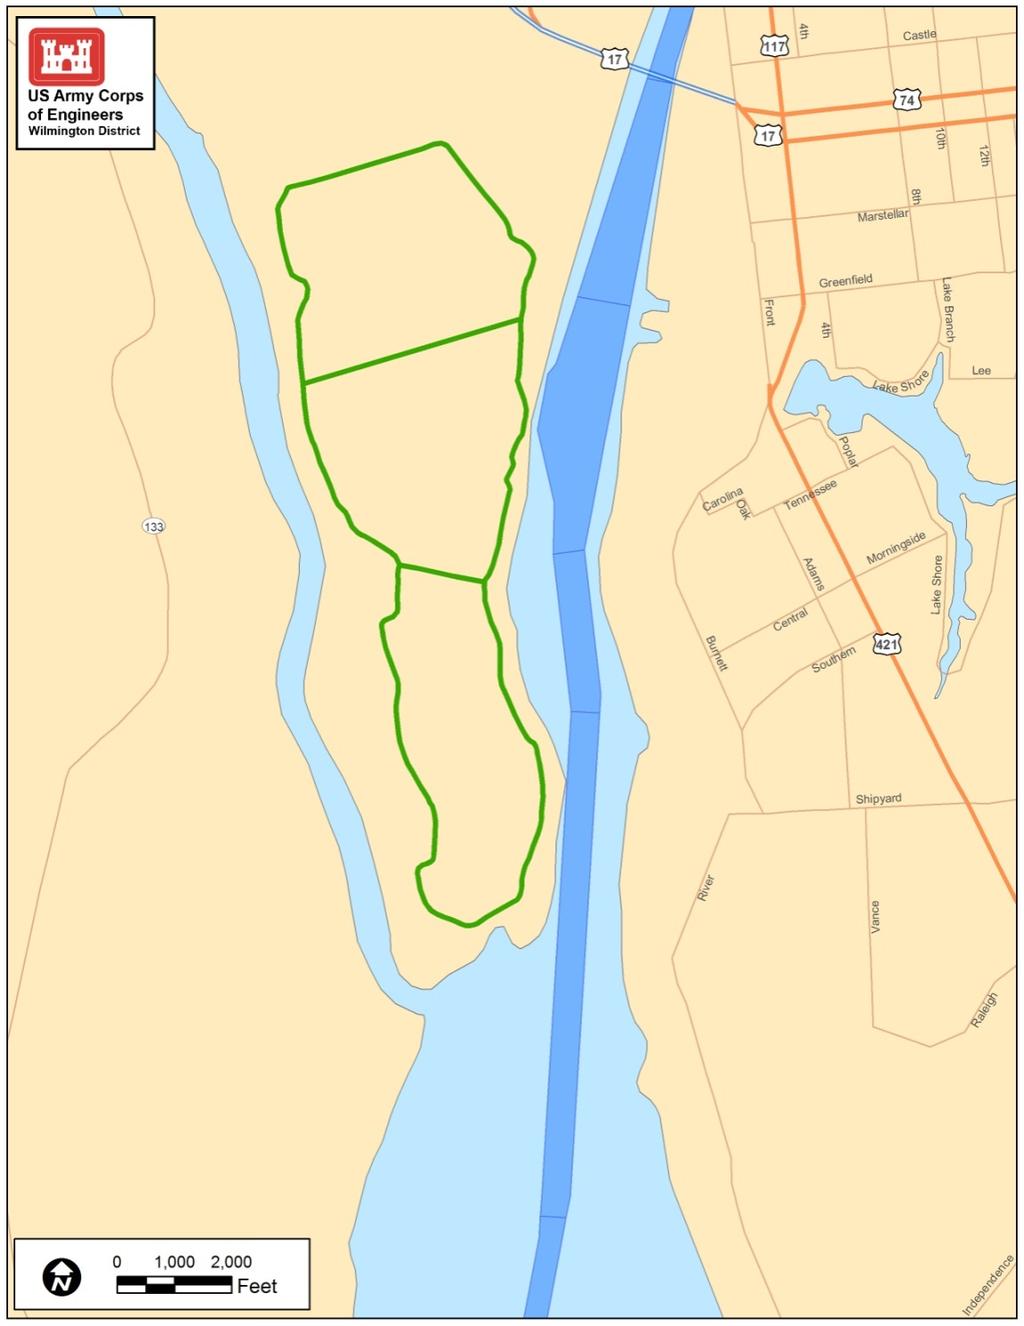 Project: Wilmington Harbor, NC Anchorage Basin & vicinity Anchorage Basin Dredging Depth: Dredging Width: Dredging Length: Dredging Quantity: Material Type: Placement Areas: Distance to Place Area: